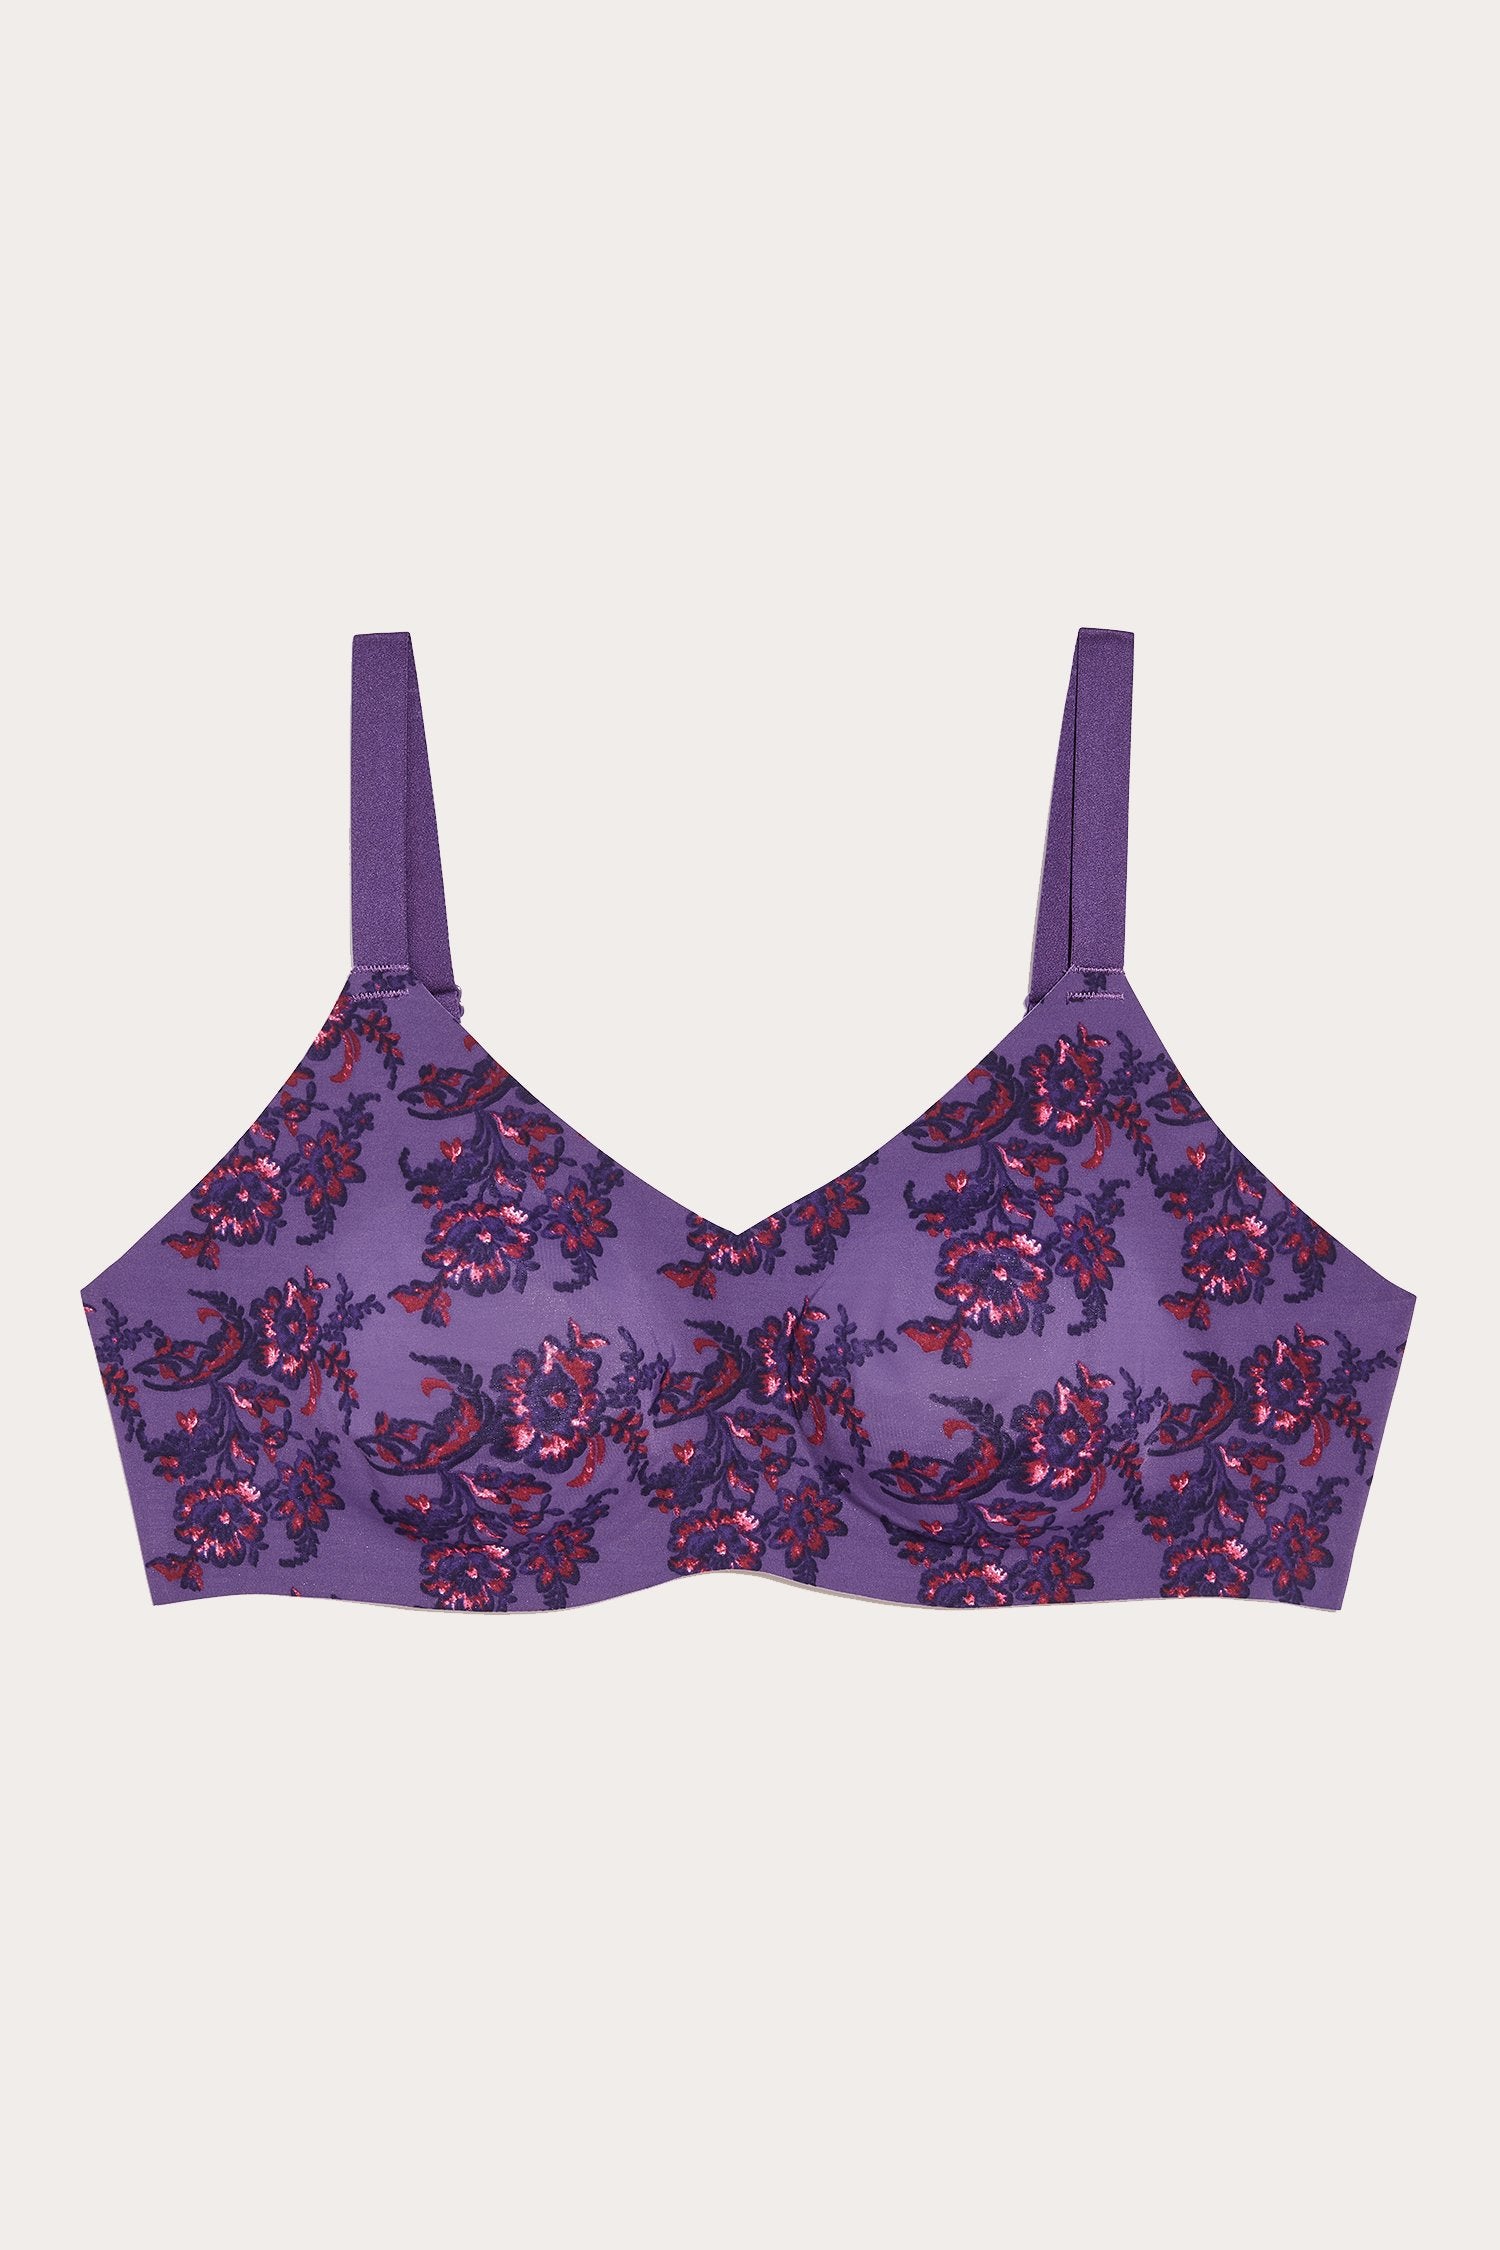 Anna Sui x Knix Autumn Evenings Luxe V-Neck Padded Bra